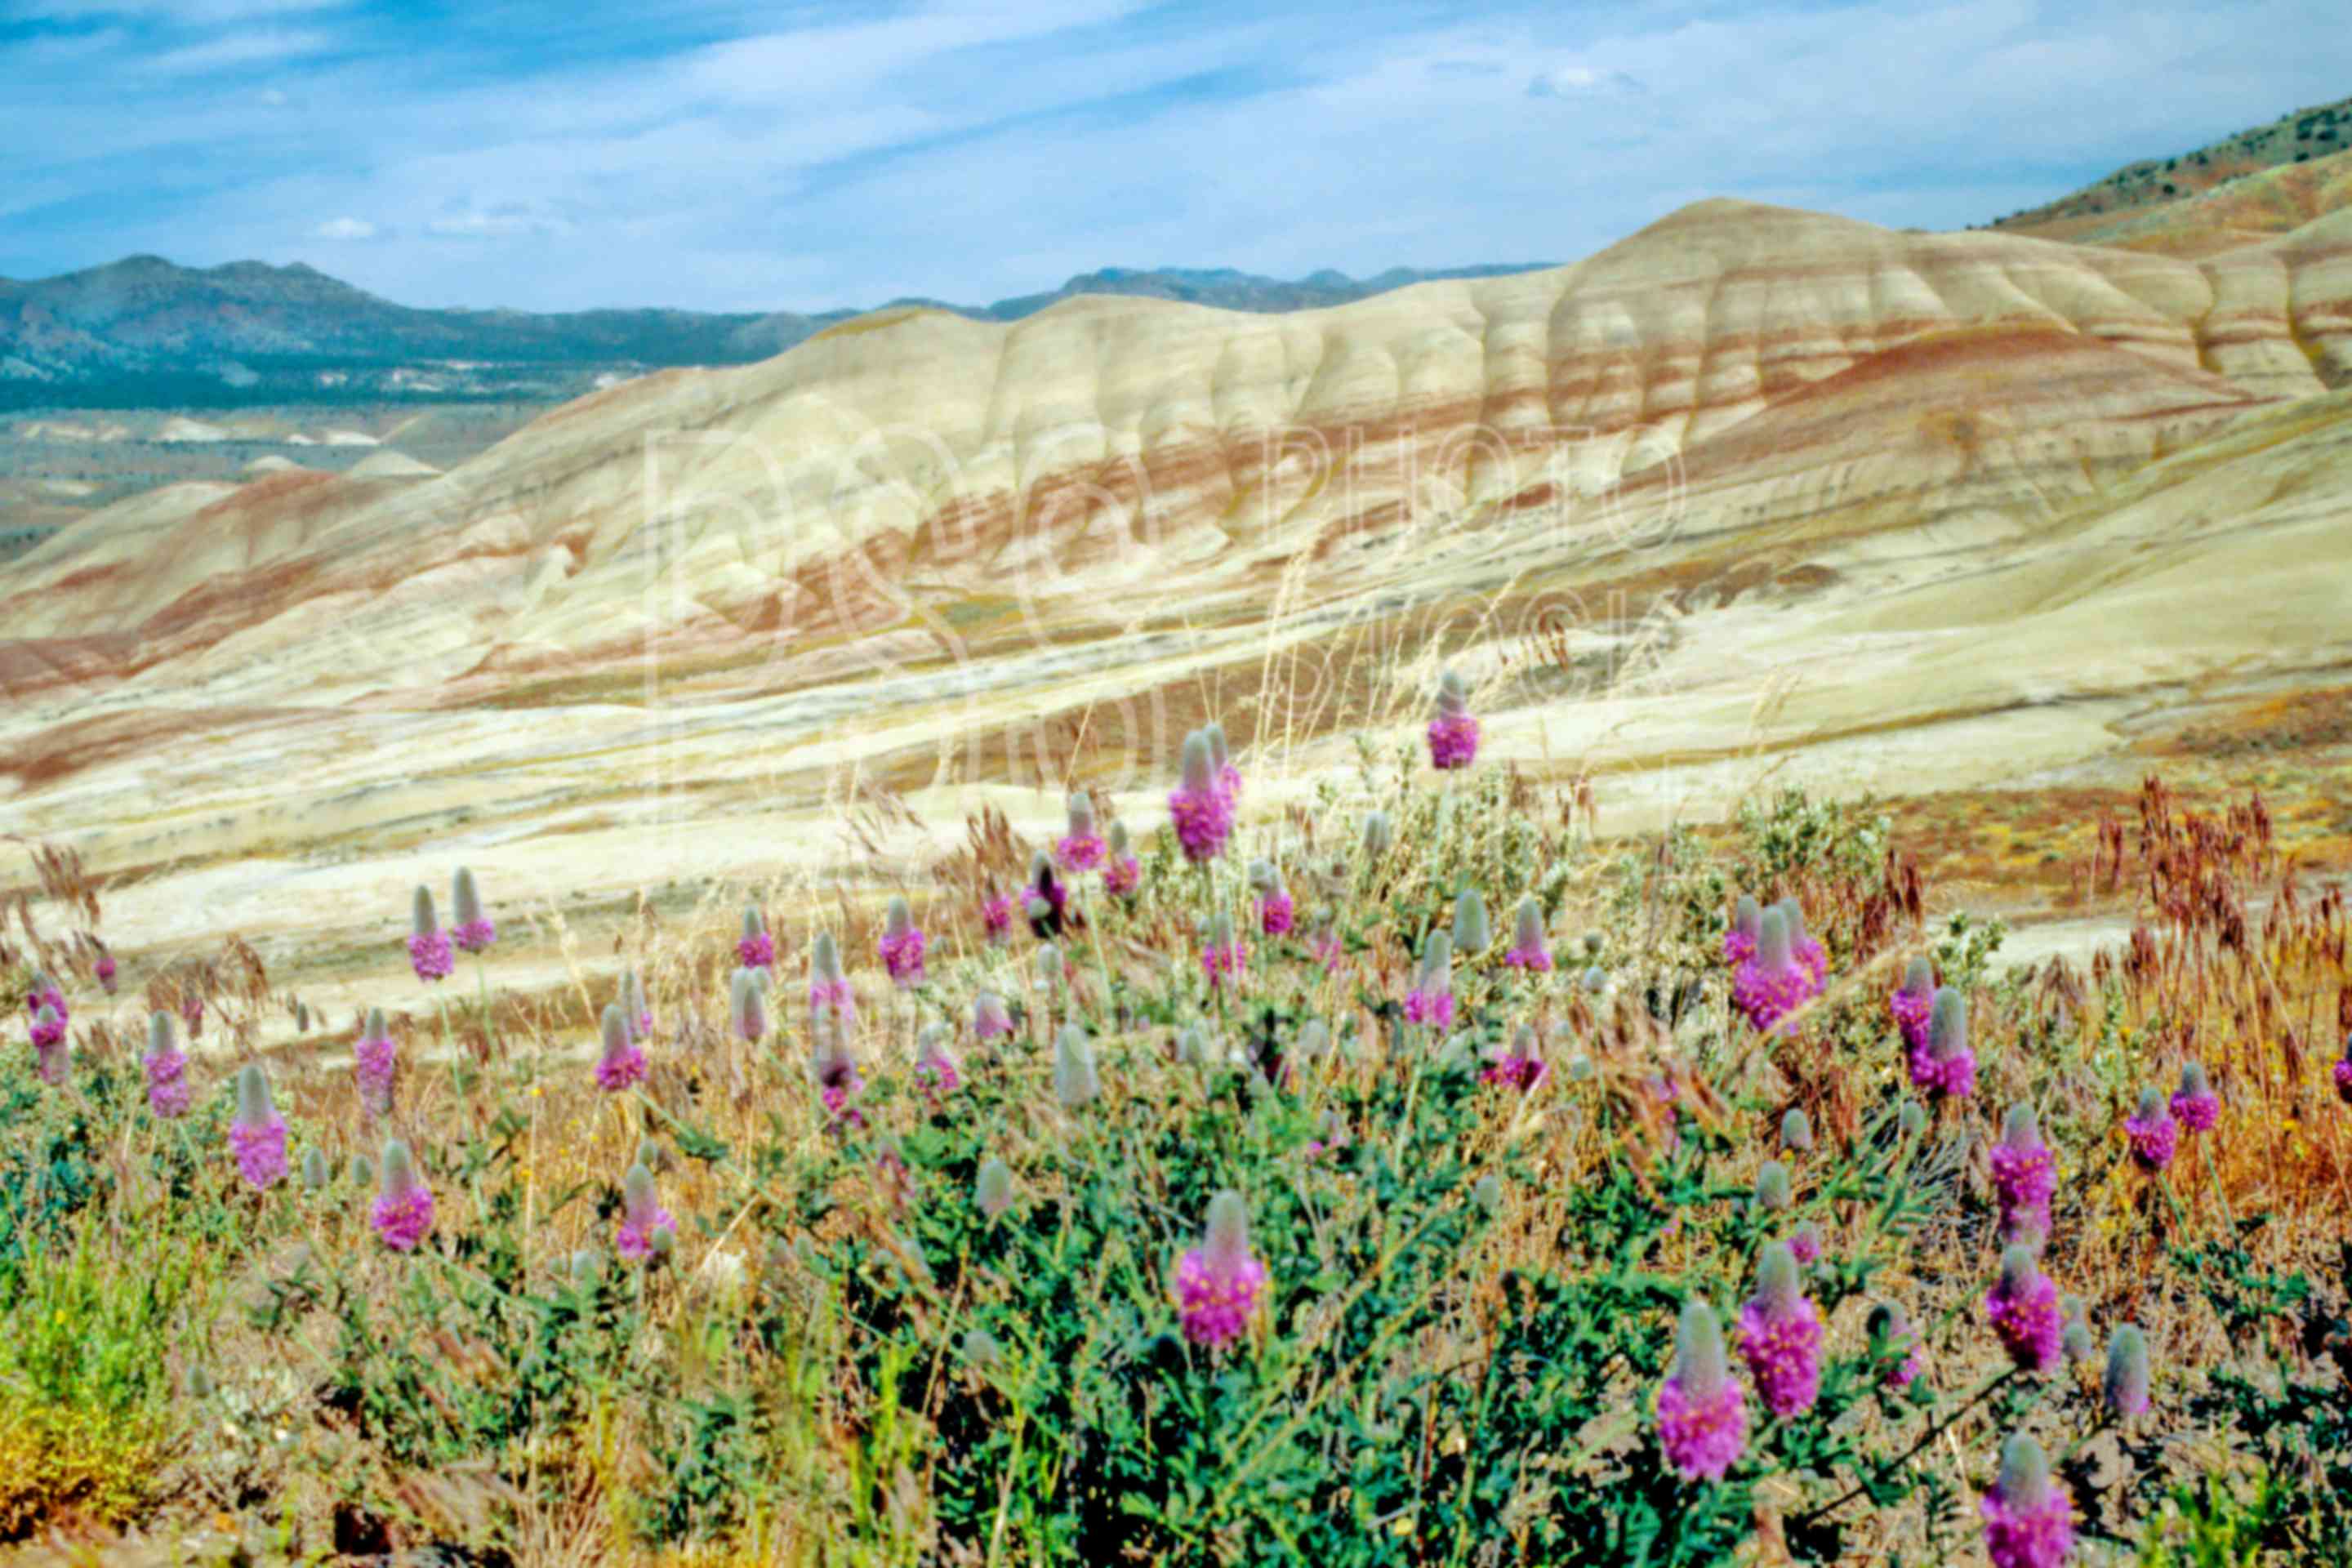 Painted Hills,john day fossil beds national monument,fossil bed,red clover,clover,usas